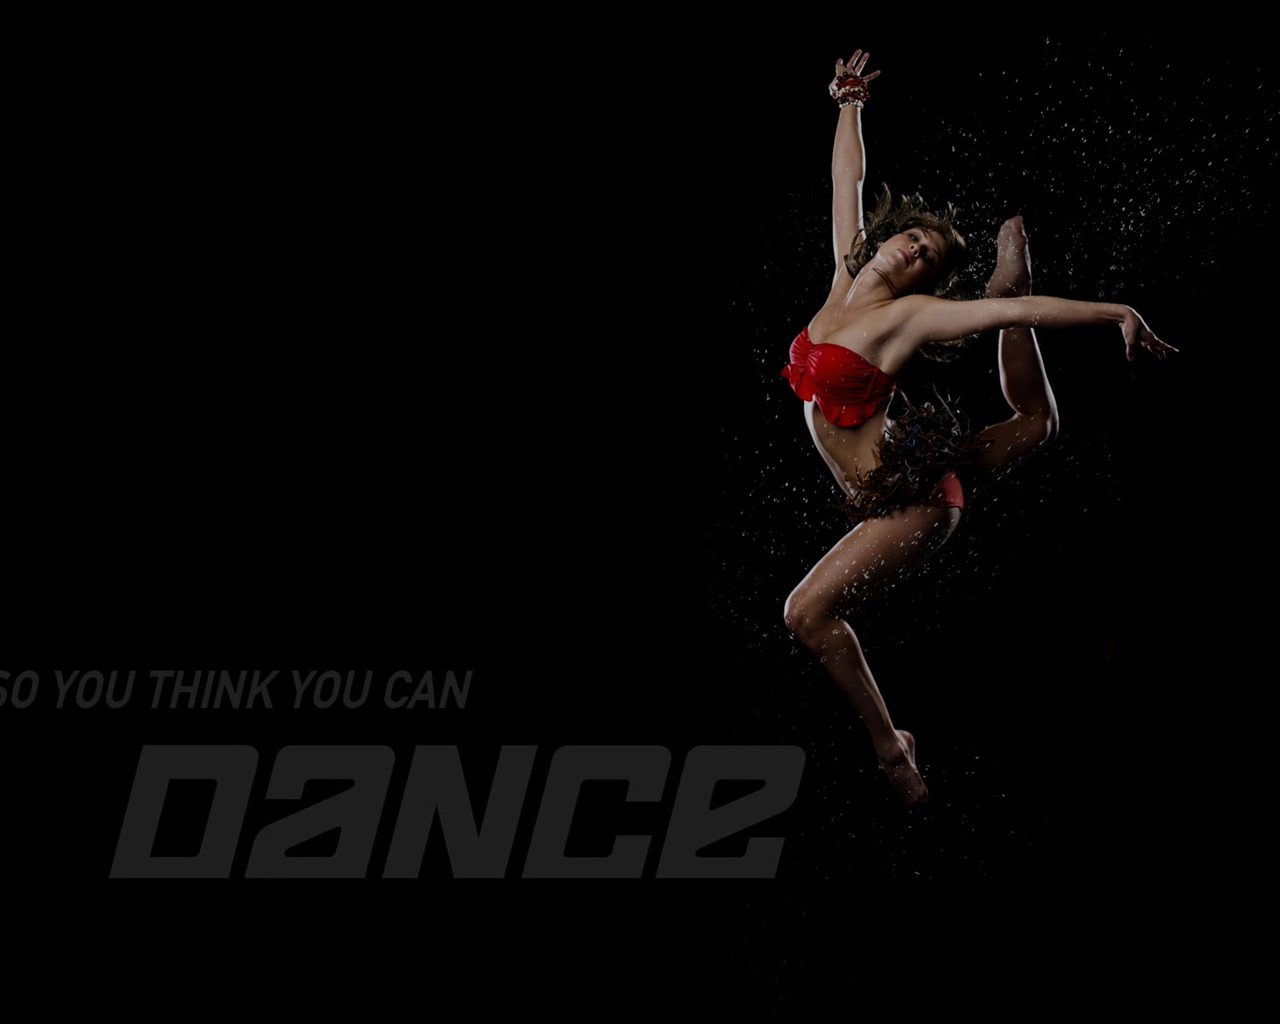 So You Think You Can Dance 舞林争霸 壁纸(二)13 - 1280x1024